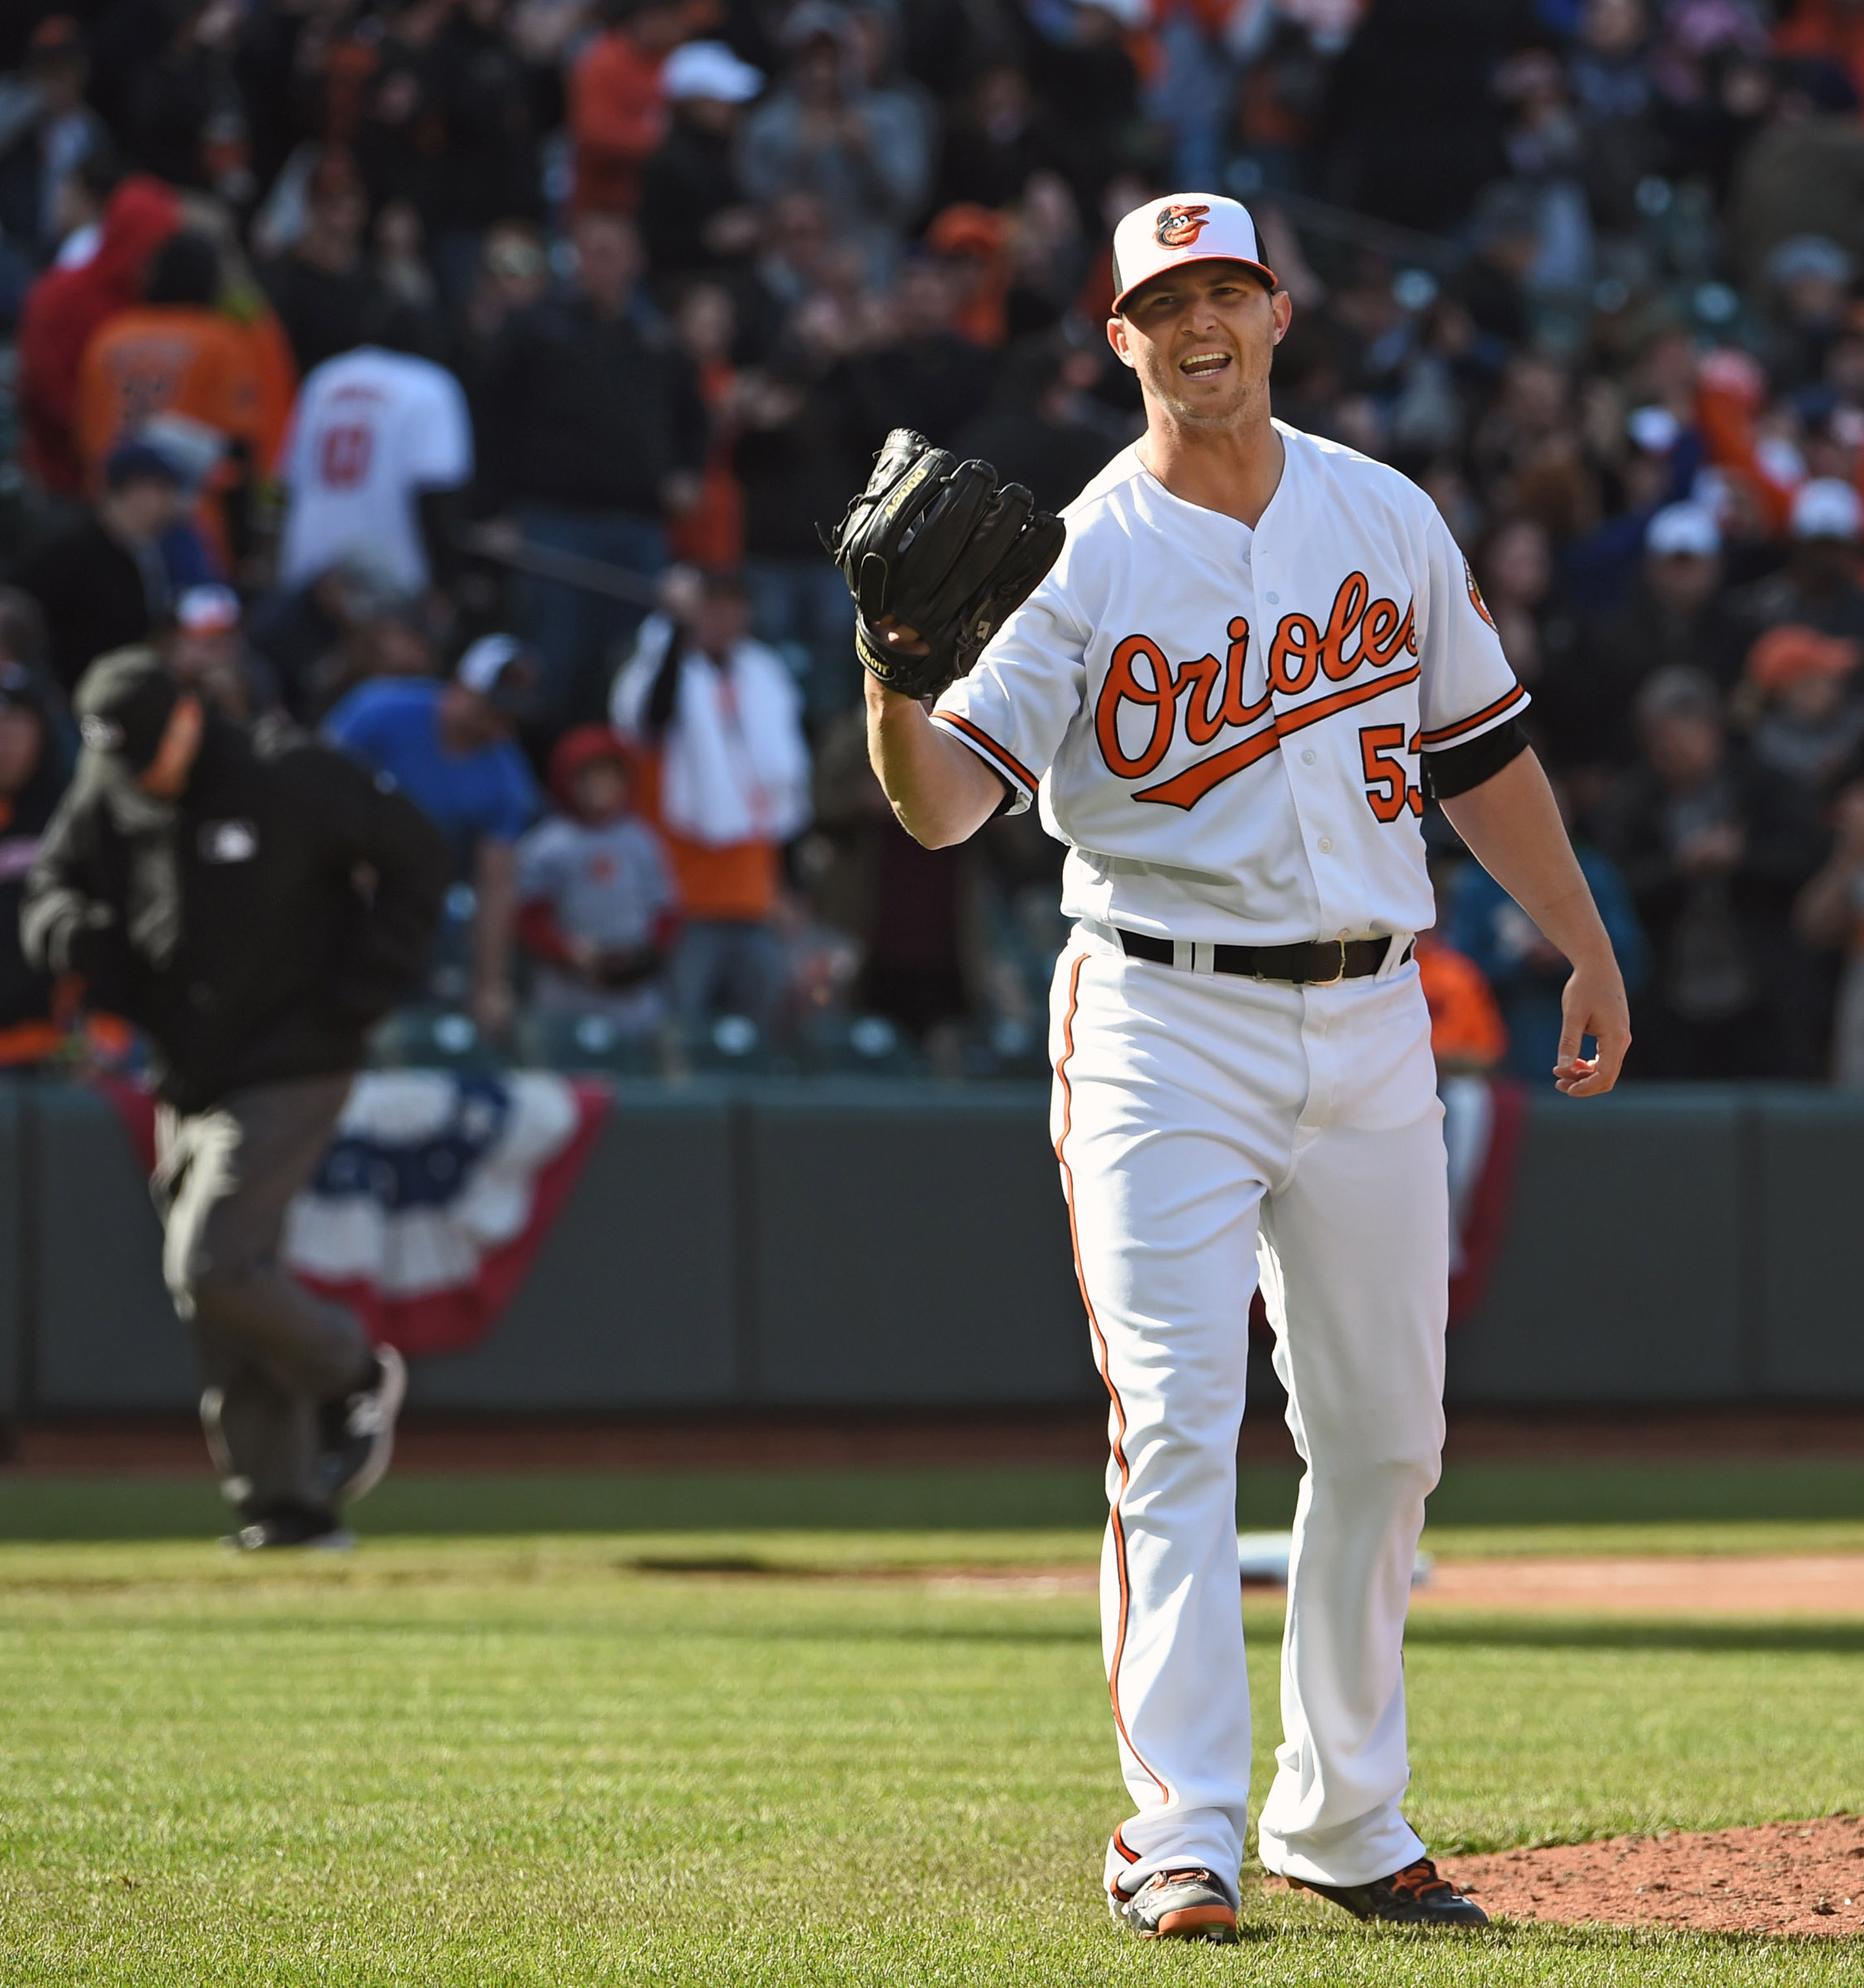 Baltimore Orioles closer Zach Britton reacts after the Orioles beat the Tampa Bay Rays on Sunday, April 10, 2016, at Oriole Park at Camden Yards in Baltimore. (Kenneth K. Lam/Baltimore Sun/TNS) ** OUTS - ELSENT, FPG, TCN - OUTS **